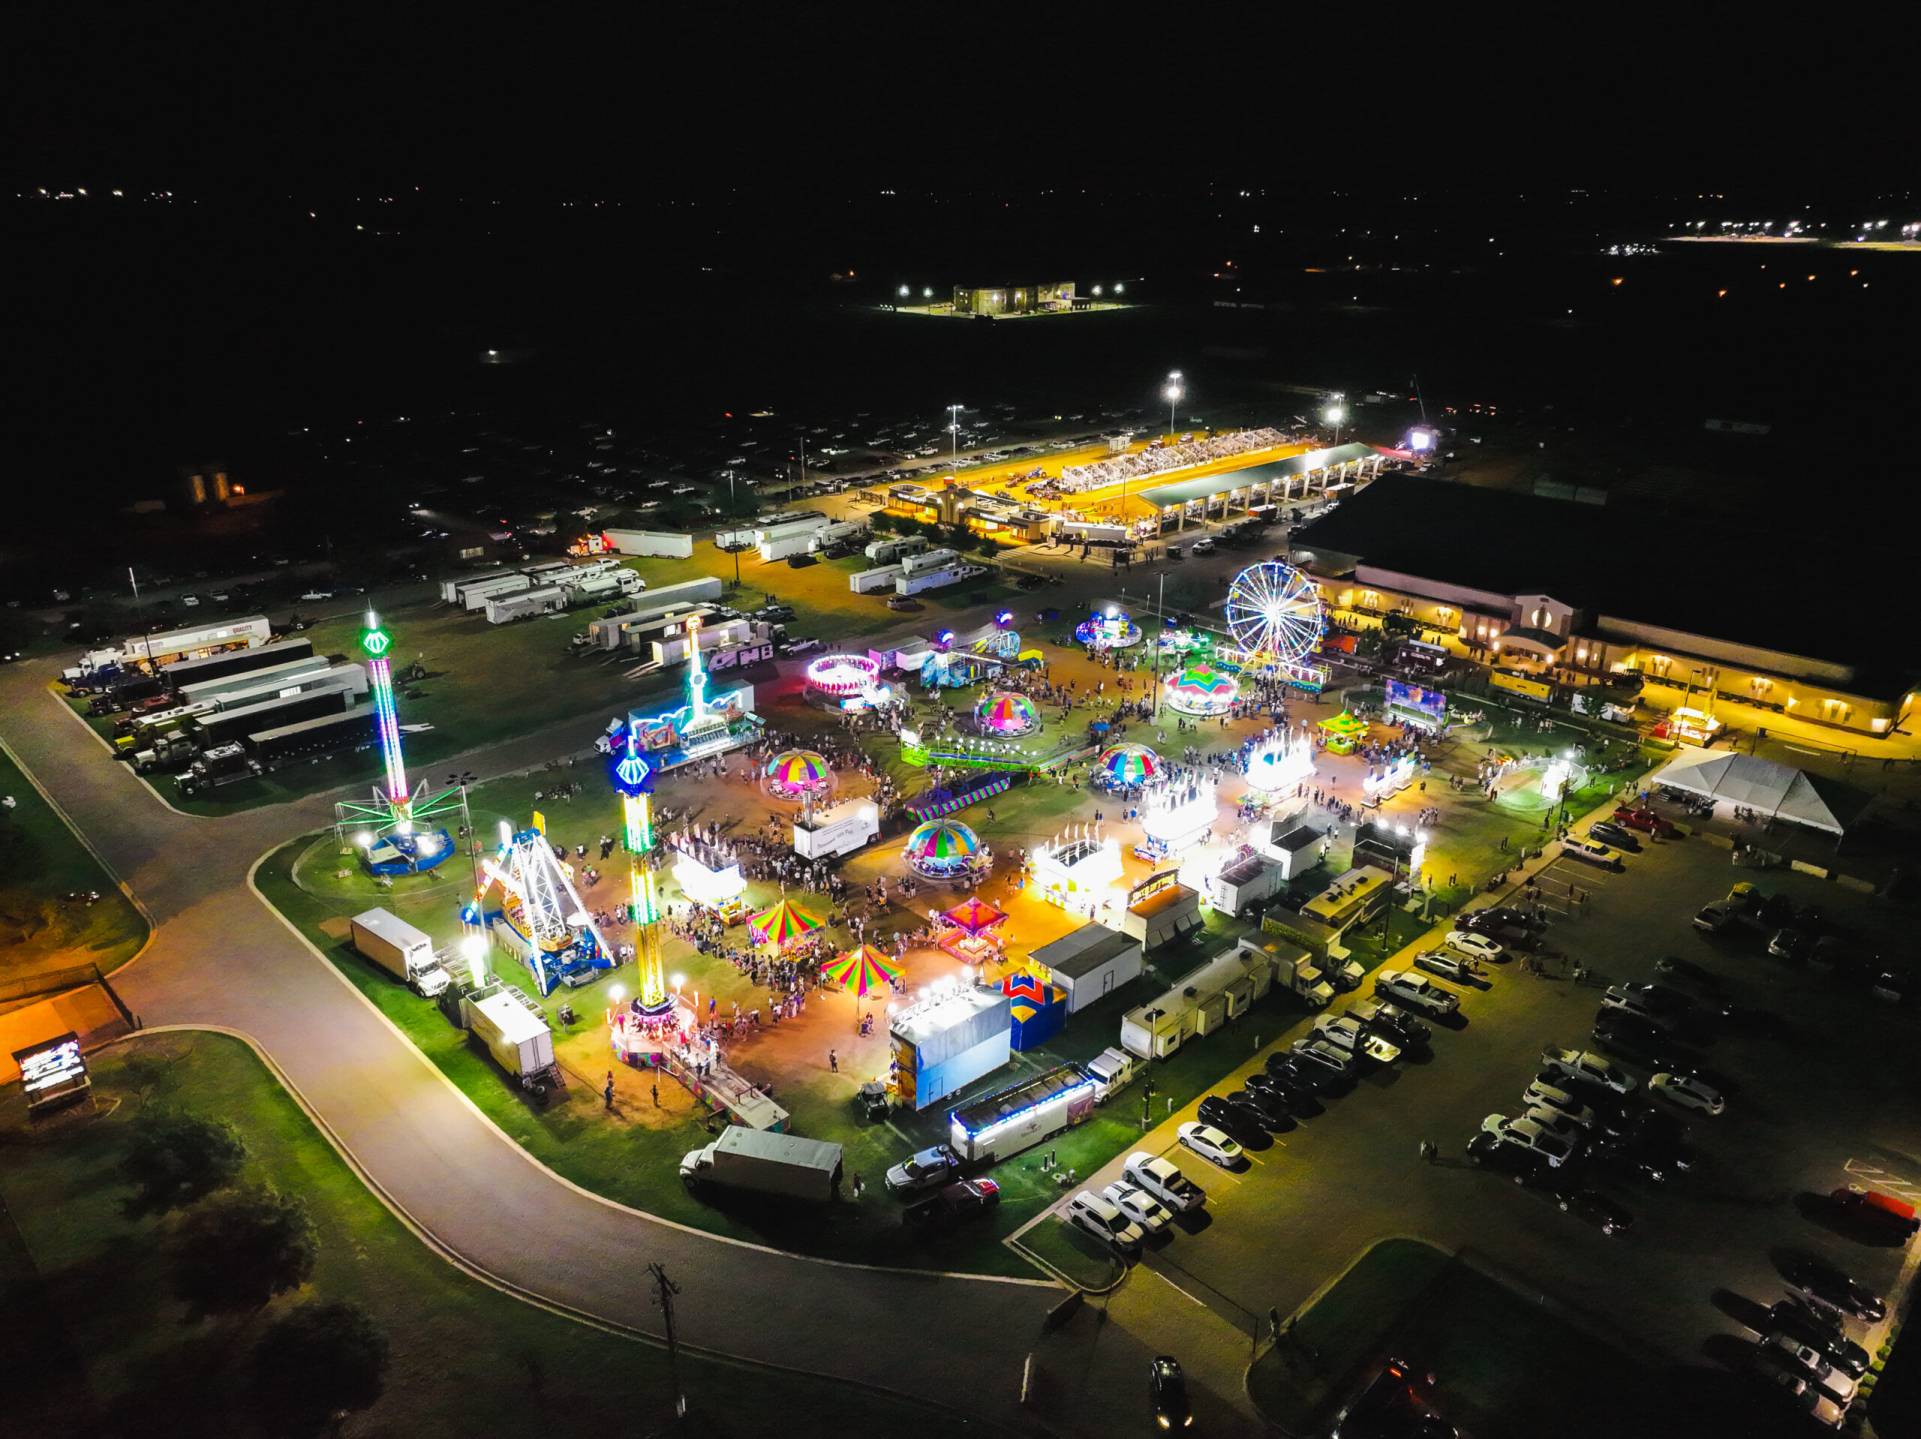 Aerial photo of a carnival lit up at night